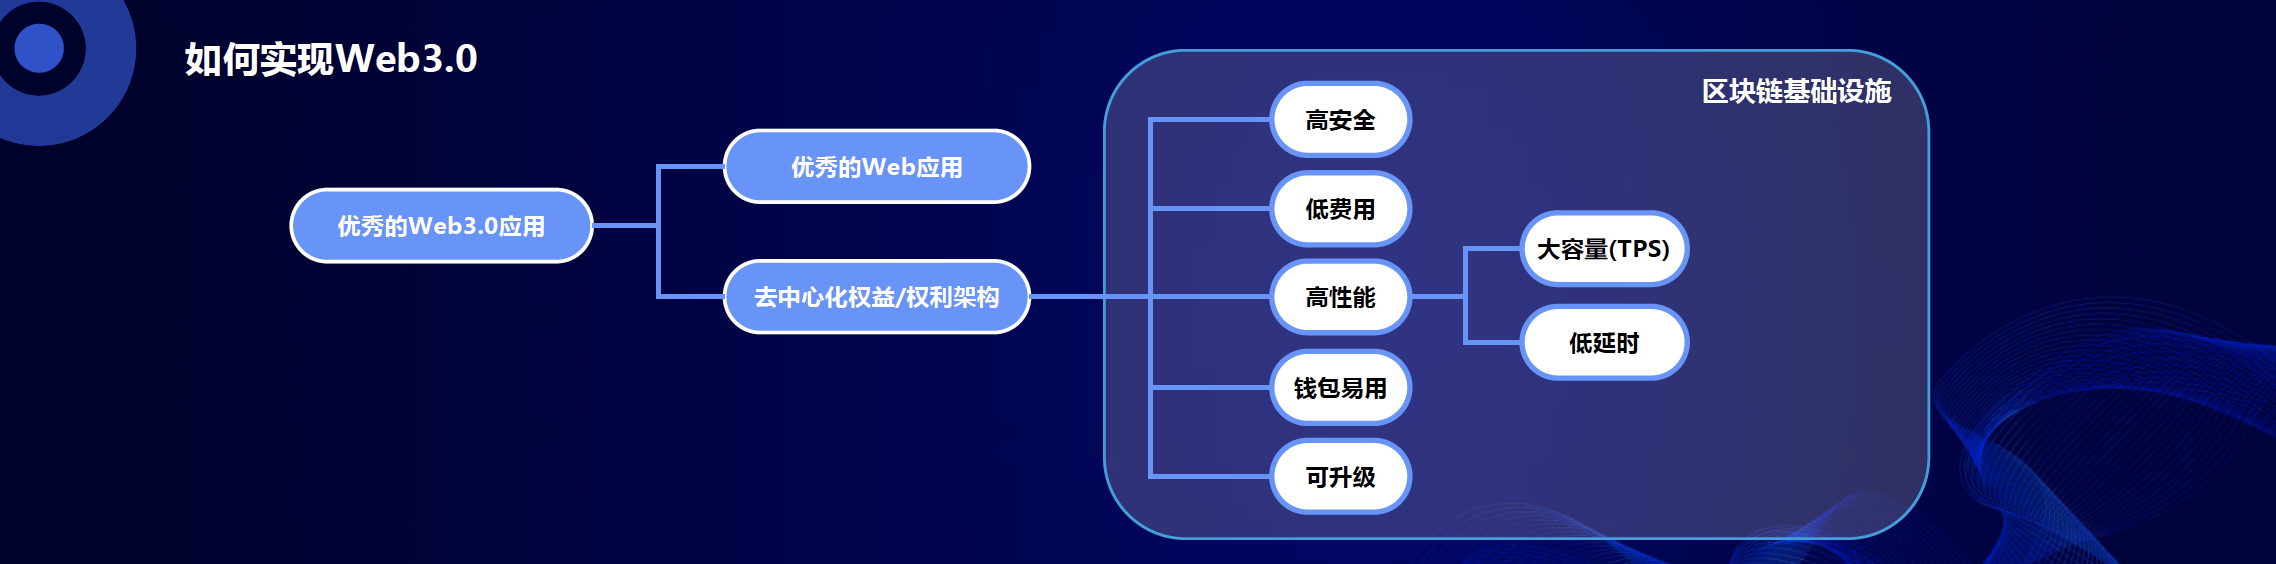 Web3.0 is the continuation of Web2.0 and the application chain is the implementation tool